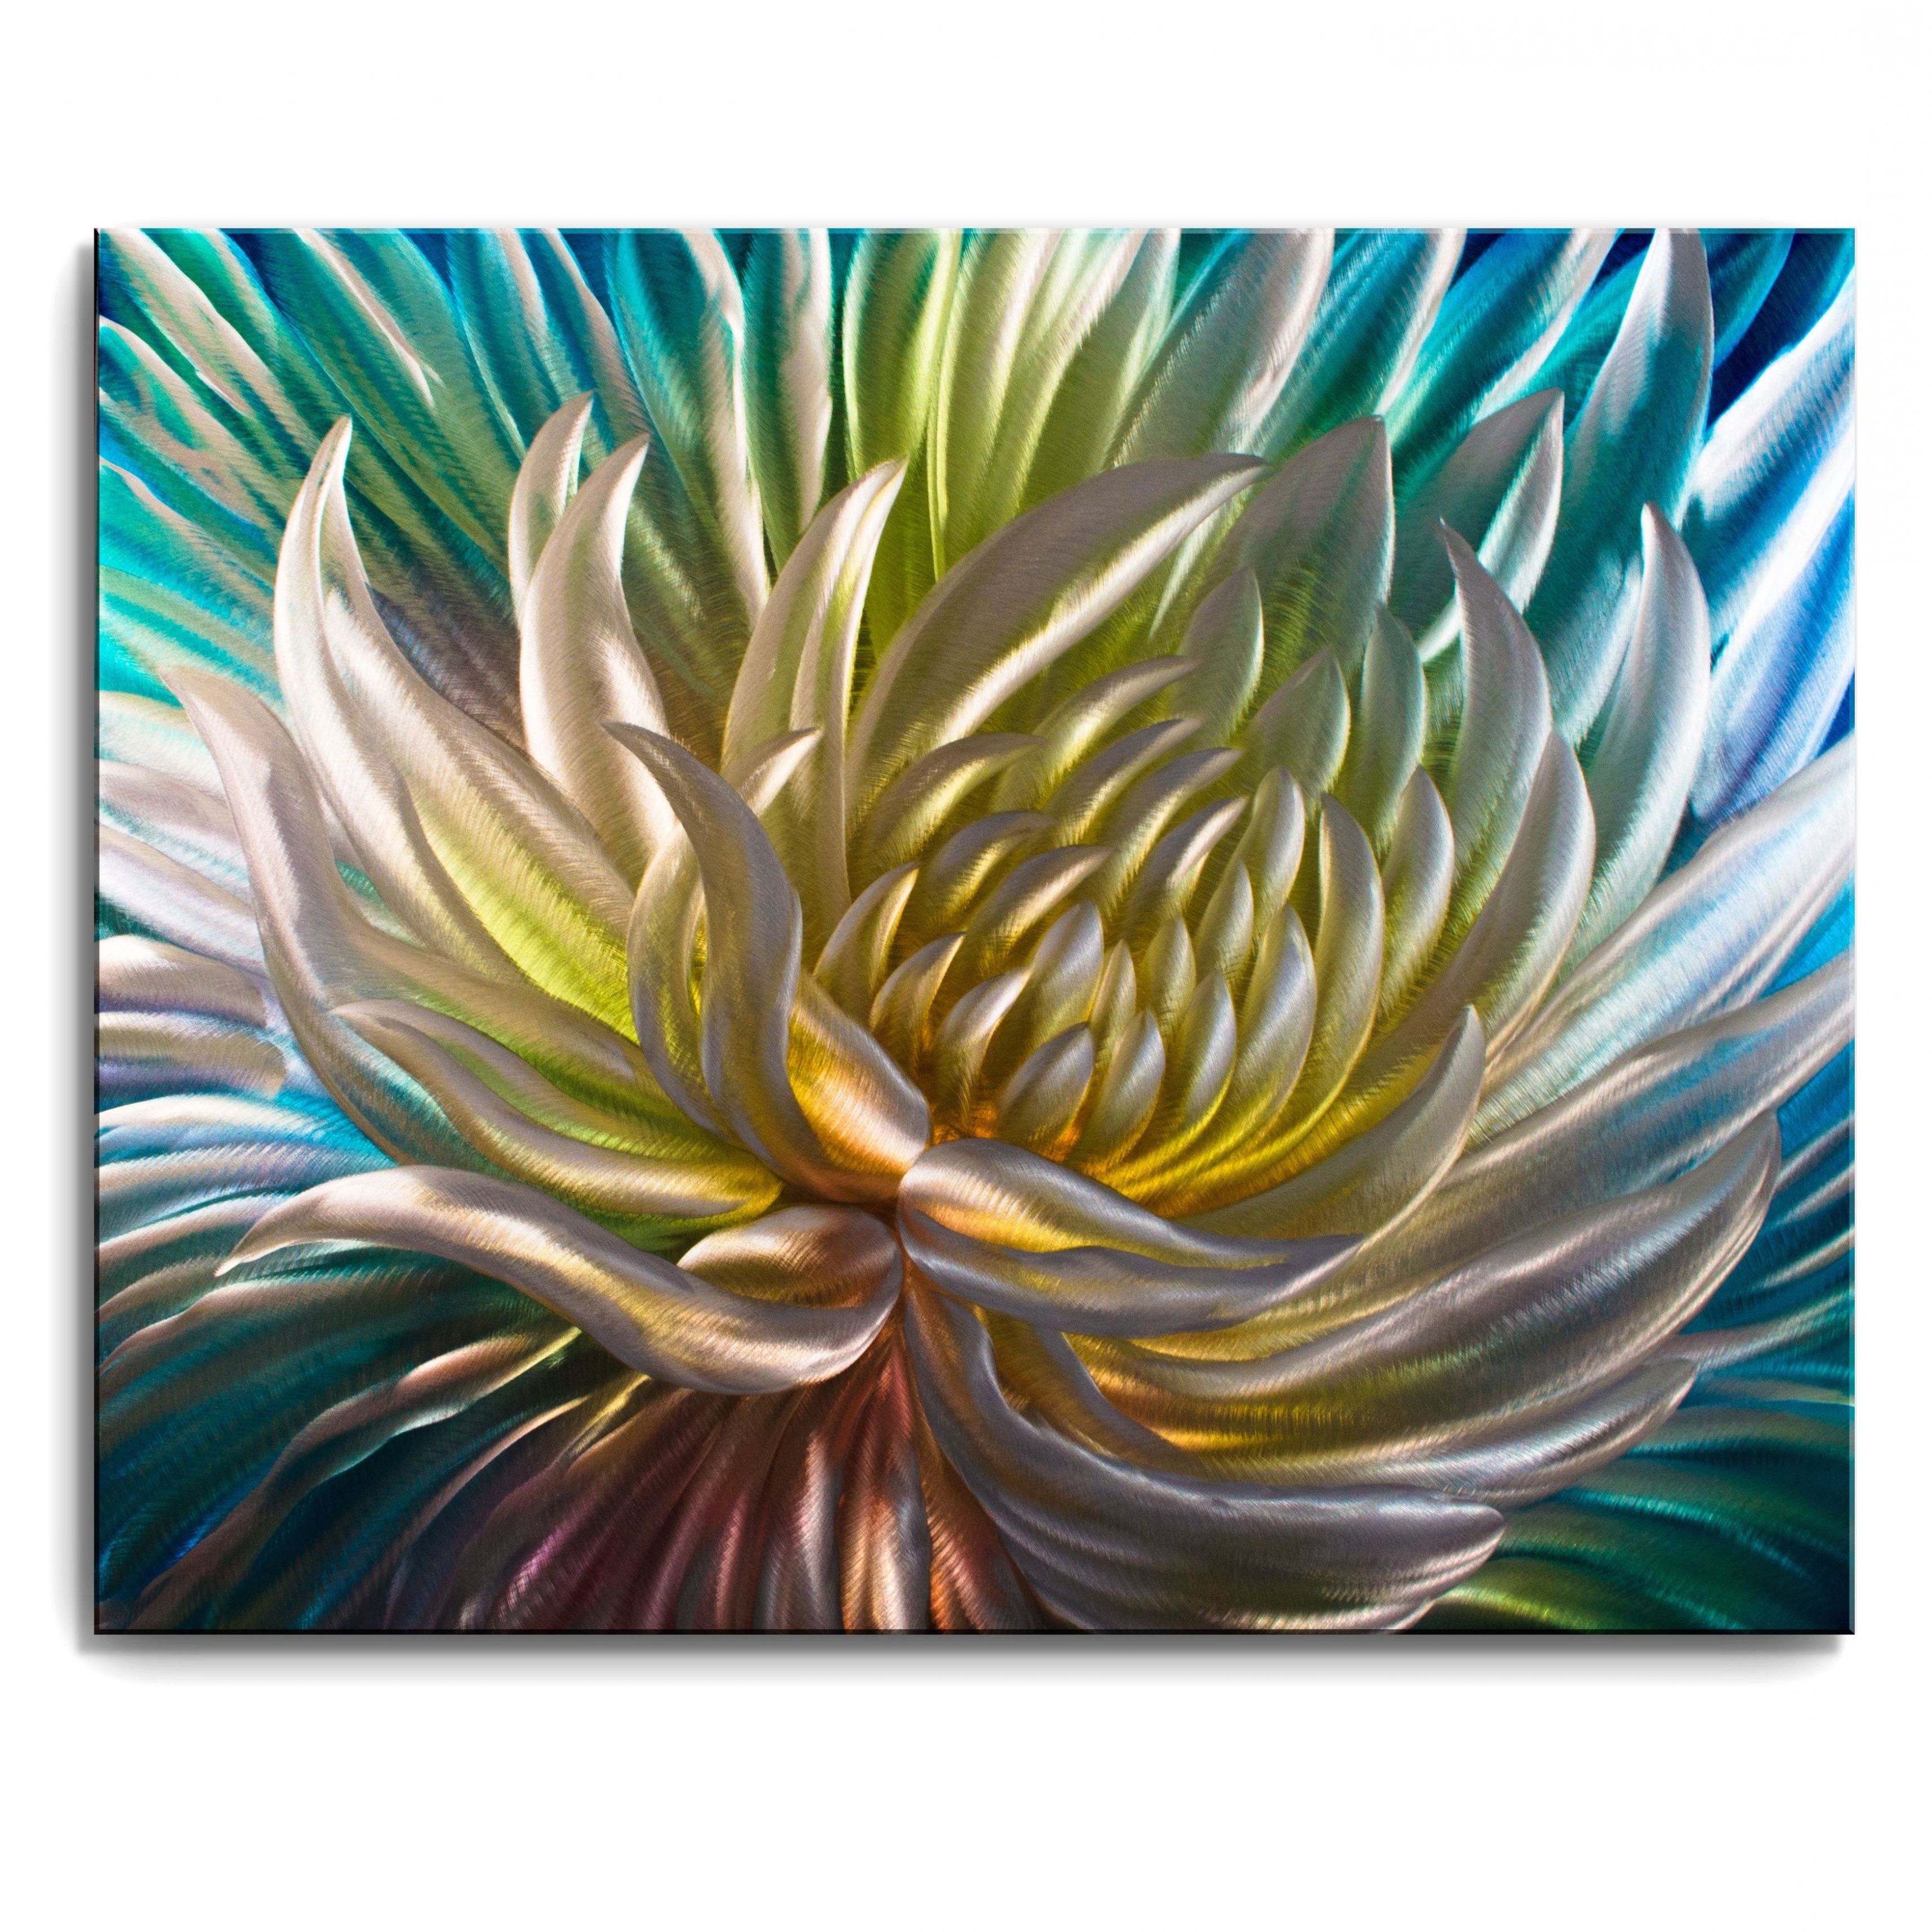 Most Recently Released Overstock Wall Art With Regard To Inspiration: Metal Artscape 'rainbow Anemone' Xl Metal Wall Art (View 17 of 20)